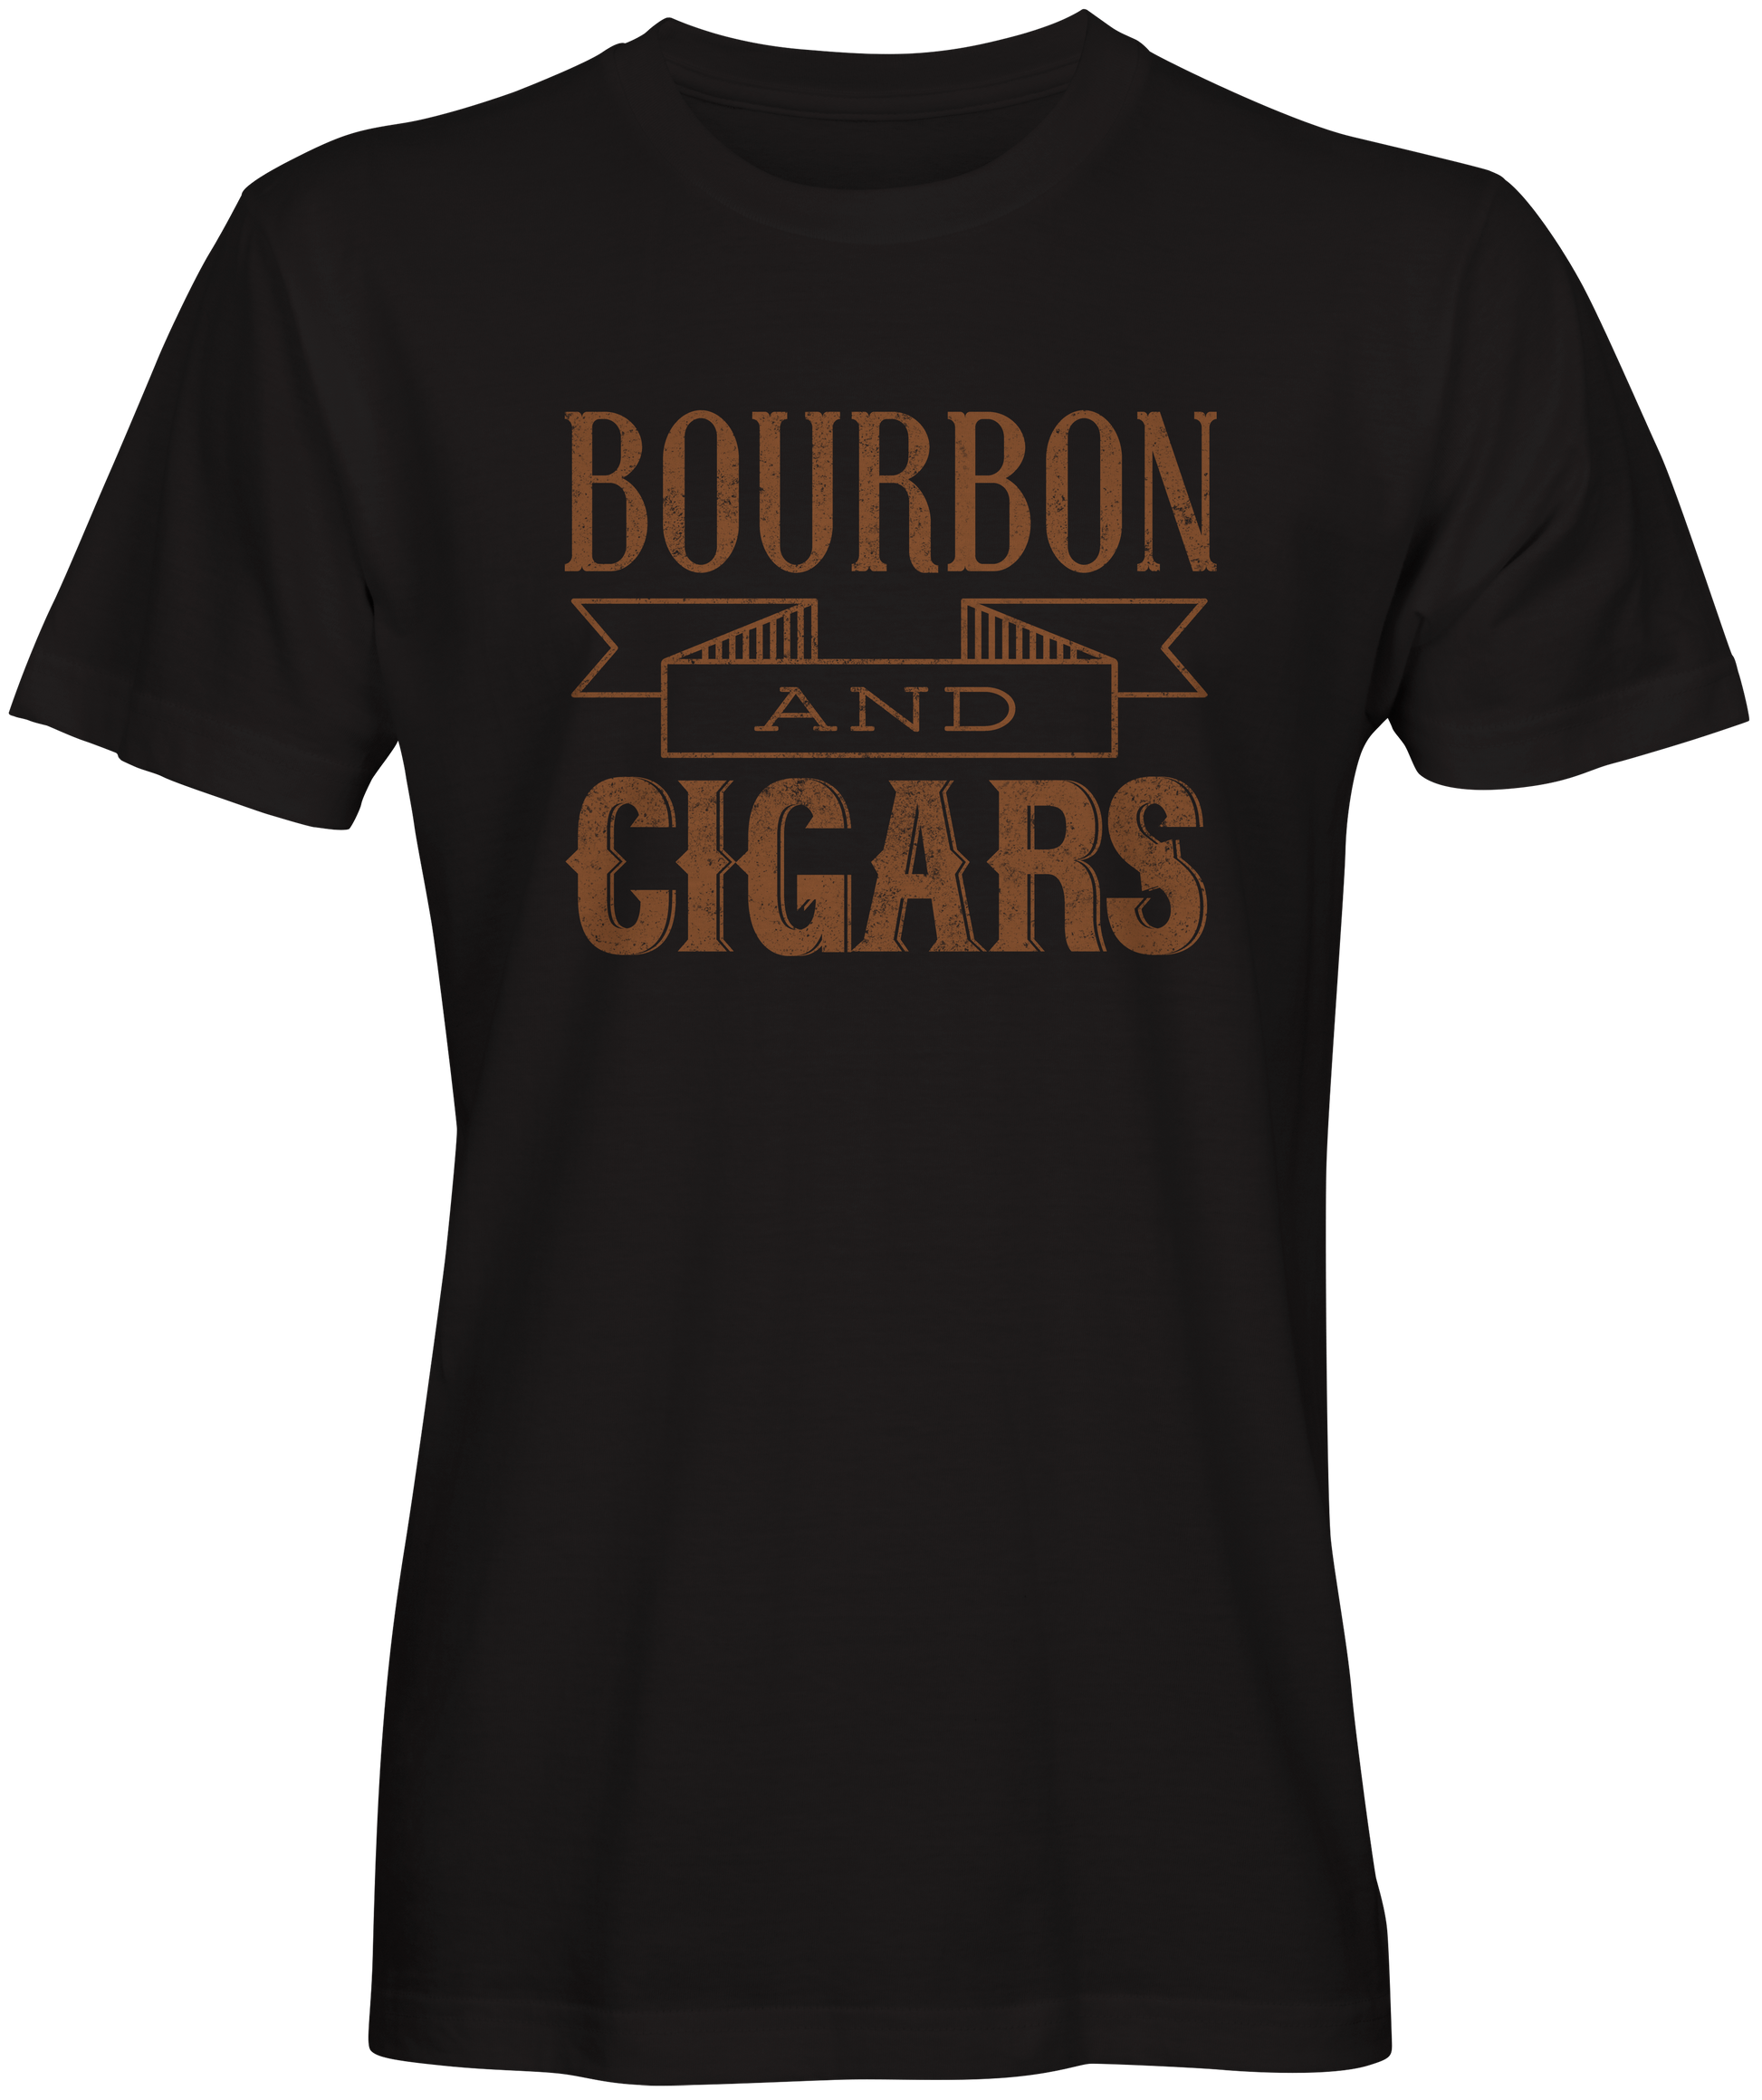 Bourbon and Cigars Inspired T-shirts